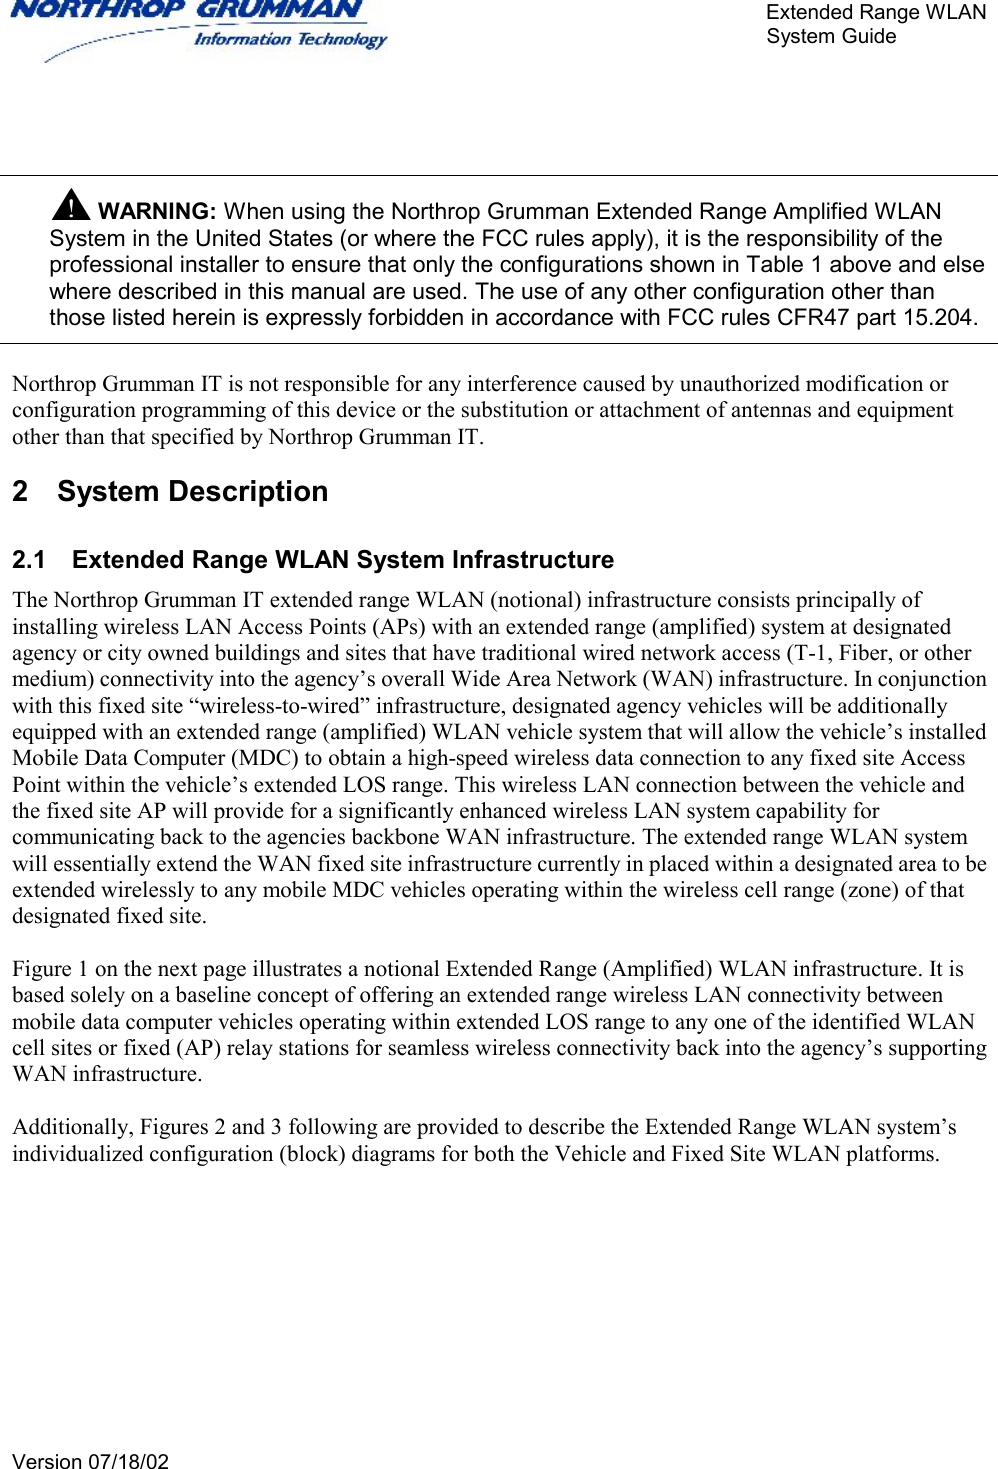       Extended Range WLAN                                                     System Guide     Version 07/18/02      WARNING: When using the Northrop Grumman Extended Range Amplified WLAN System in the United States (or where the FCC rules apply), it is the responsibility of the professional installer to ensure that only the configurations shown in Table 1 above and else where described in this manual are used. The use of any other configuration other than those listed herein is expressly forbidden in accordance with FCC rules CFR47 part 15.204.  Northrop Grumman IT is not responsible for any interference caused by unauthorized modification or configuration programming of this device or the substitution or attachment of antennas and equipment other than that specified by Northrop Grumman IT. 2 System Description 2.1  Extended Range WLAN System Infrastructure The Northrop Grumman IT extended range WLAN (notional) infrastructure consists principally of installing wireless LAN Access Points (APs) with an extended range (amplified) system at designated agency or city owned buildings and sites that have traditional wired network access (T-1, Fiber, or other medium) connectivity into the agency’s overall Wide Area Network (WAN) infrastructure. In conjunction with this fixed site “wireless-to-wired” infrastructure, designated agency vehicles will be additionally equipped with an extended range (amplified) WLAN vehicle system that will allow the vehicle’s installed Mobile Data Computer (MDC) to obtain a high-speed wireless data connection to any fixed site Access Point within the vehicle’s extended LOS range. This wireless LAN connection between the vehicle and the fixed site AP will provide for a significantly enhanced wireless LAN system capability for communicating back to the agencies backbone WAN infrastructure. The extended range WLAN system will essentially extend the WAN fixed site infrastructure currently in placed within a designated area to be extended wirelessly to any mobile MDC vehicles operating within the wireless cell range (zone) of that designated fixed site.   Figure 1 on the next page illustrates a notional Extended Range (Amplified) WLAN infrastructure. It is based solely on a baseline concept of offering an extended range wireless LAN connectivity between mobile data computer vehicles operating within extended LOS range to any one of the identified WLAN cell sites or fixed (AP) relay stations for seamless wireless connectivity back into the agency’s supporting WAN infrastructure.   Additionally, Figures 2 and 3 following are provided to describe the Extended Range WLAN system’s individualized configuration (block) diagrams for both the Vehicle and Fixed Site WLAN platforms. 